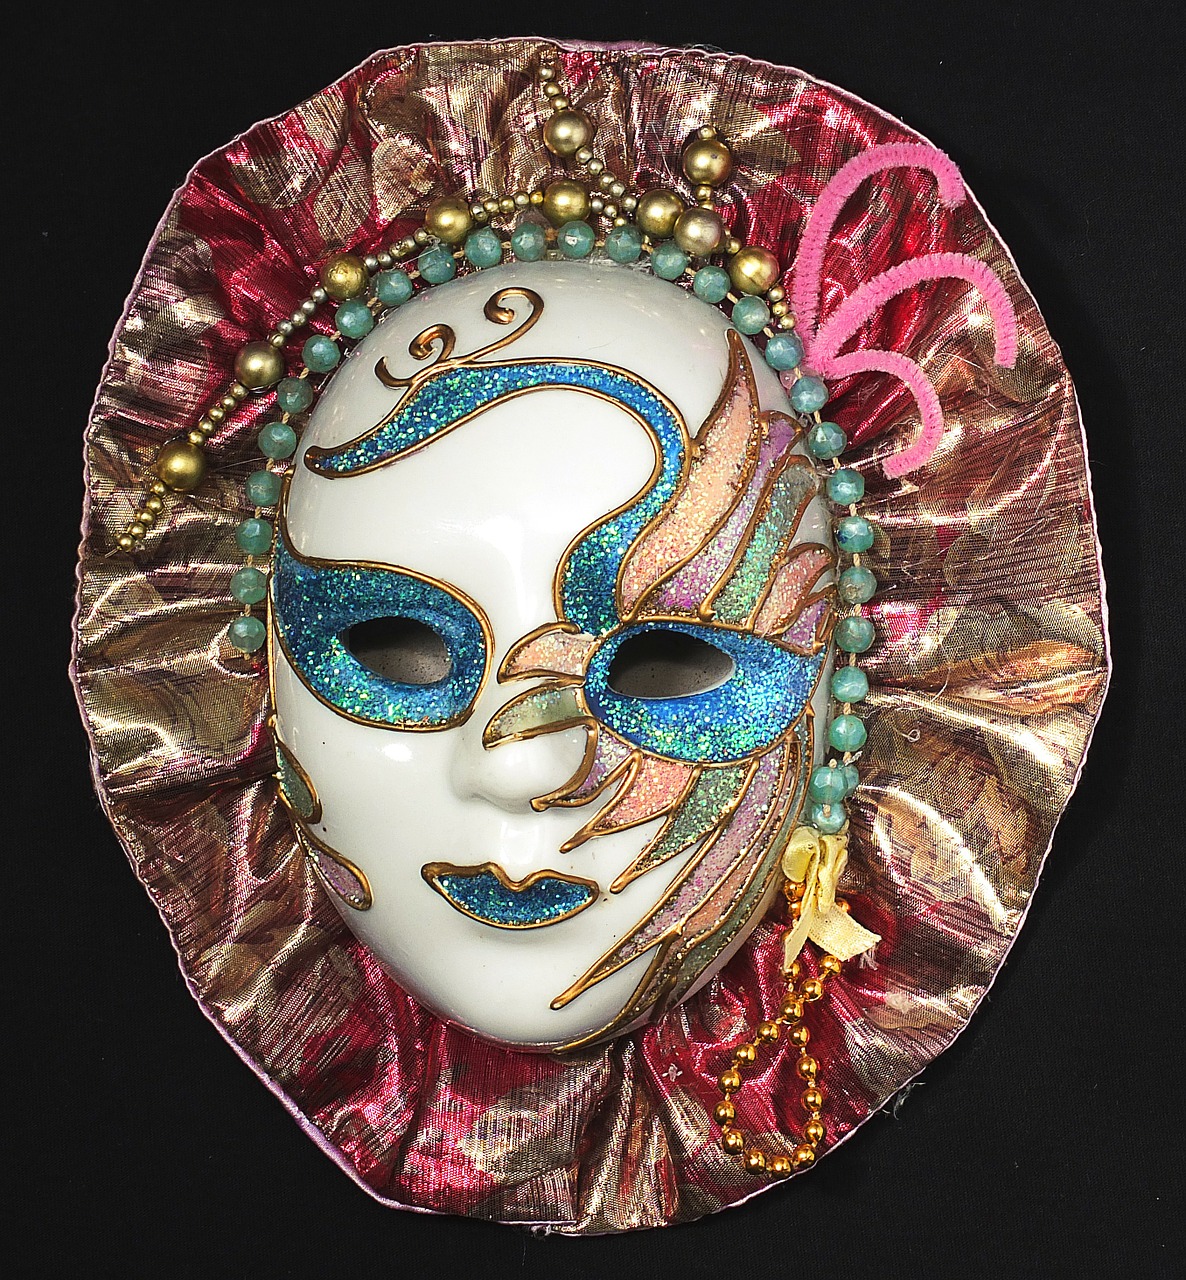 Mask,porcelain,female,free pictures, free photos - free image from ...